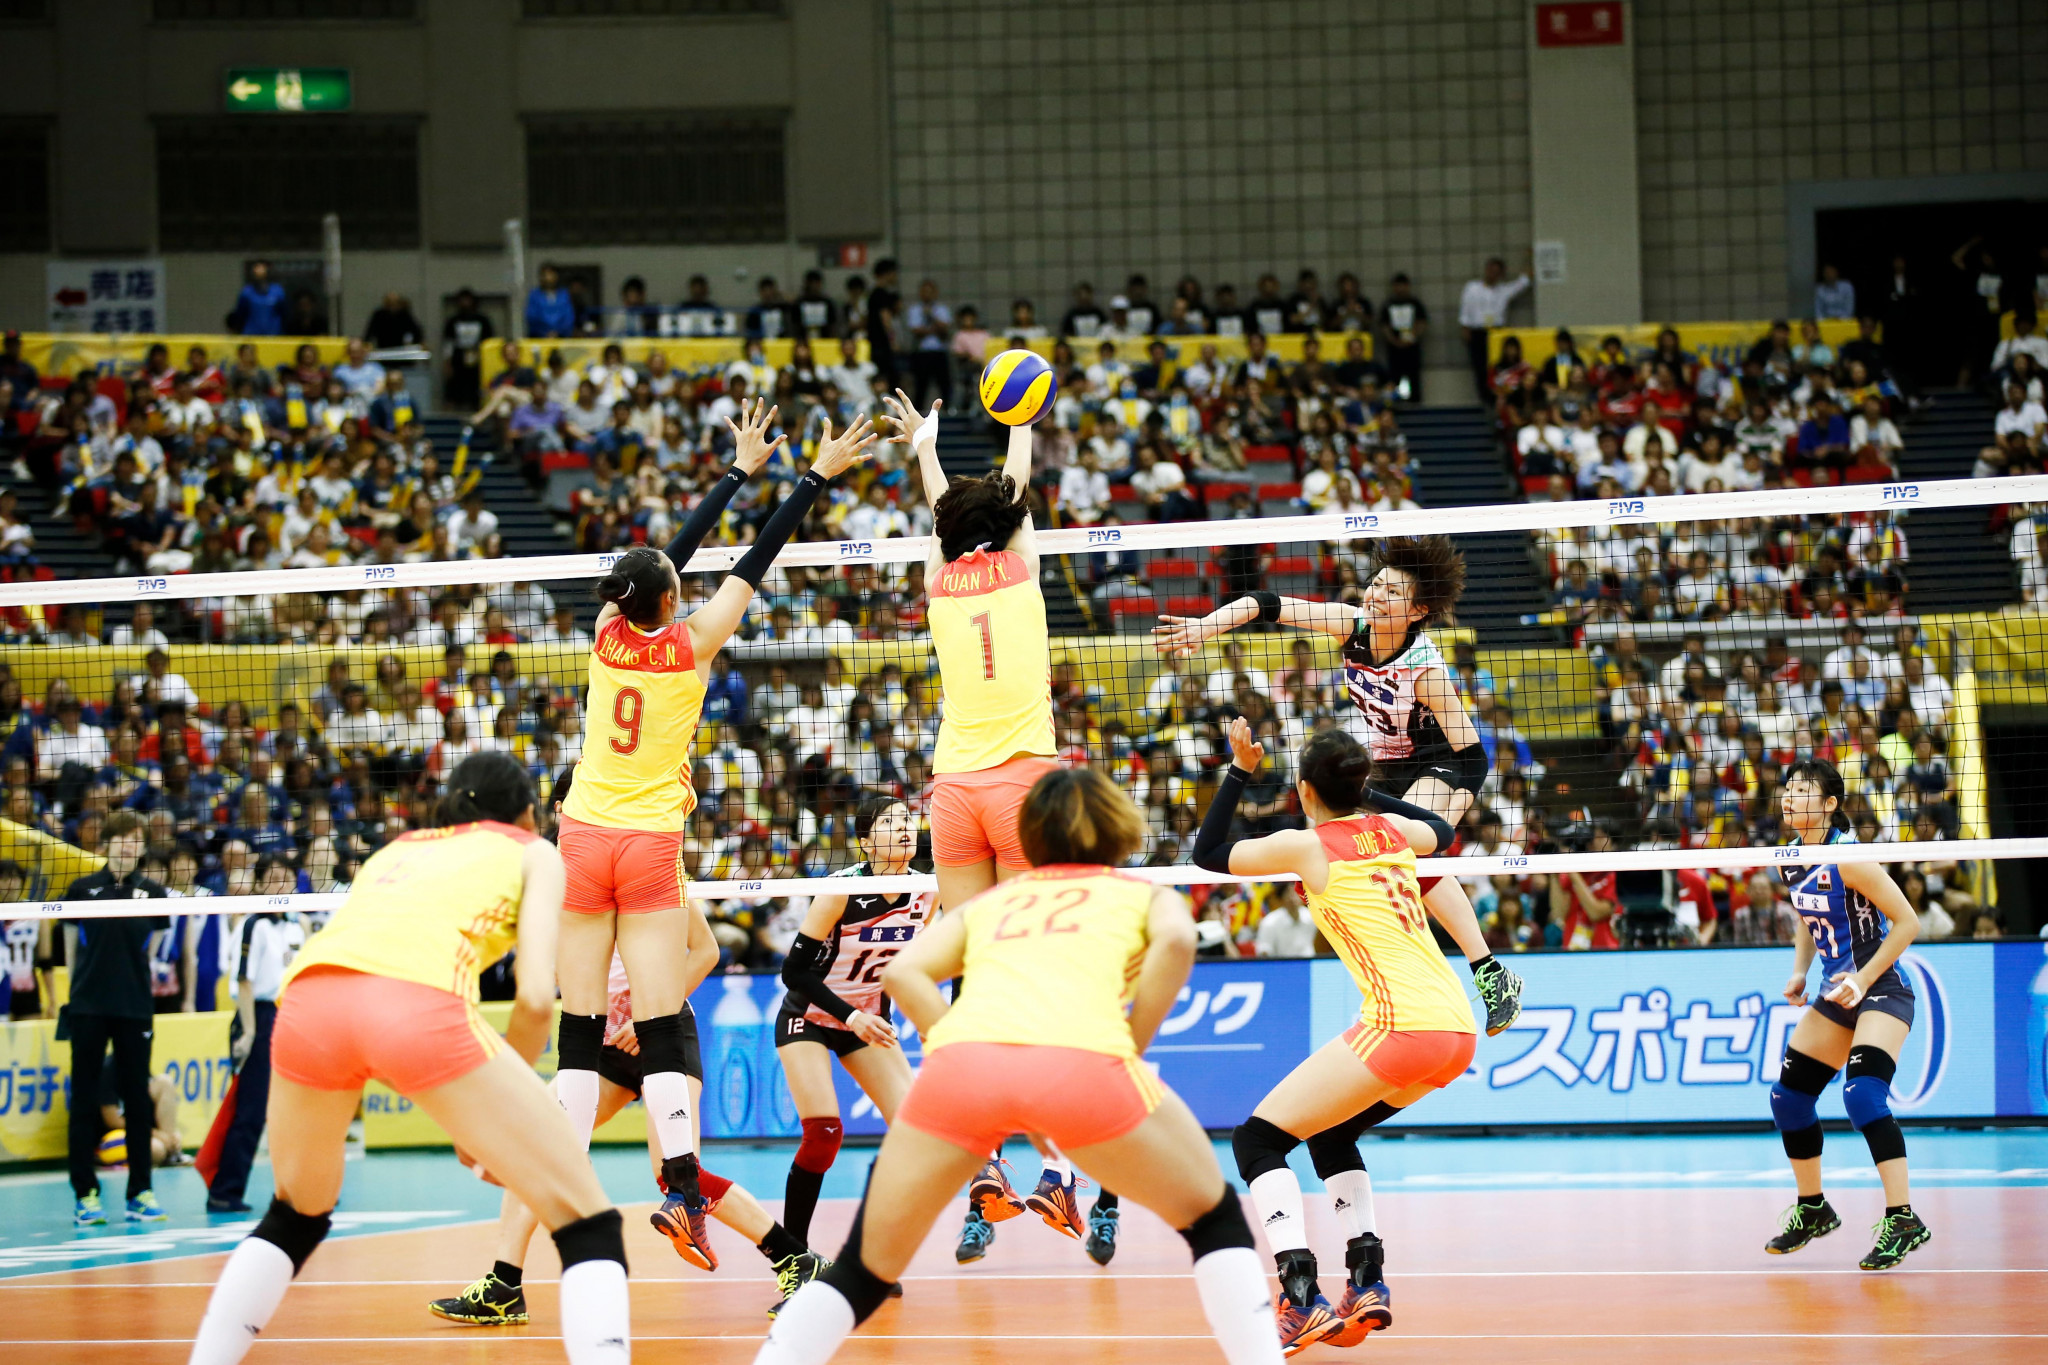 China defeated hosts Japan 25-22, 24-26, 25-18, 25-16 in the final match of the tournament ©FIVB